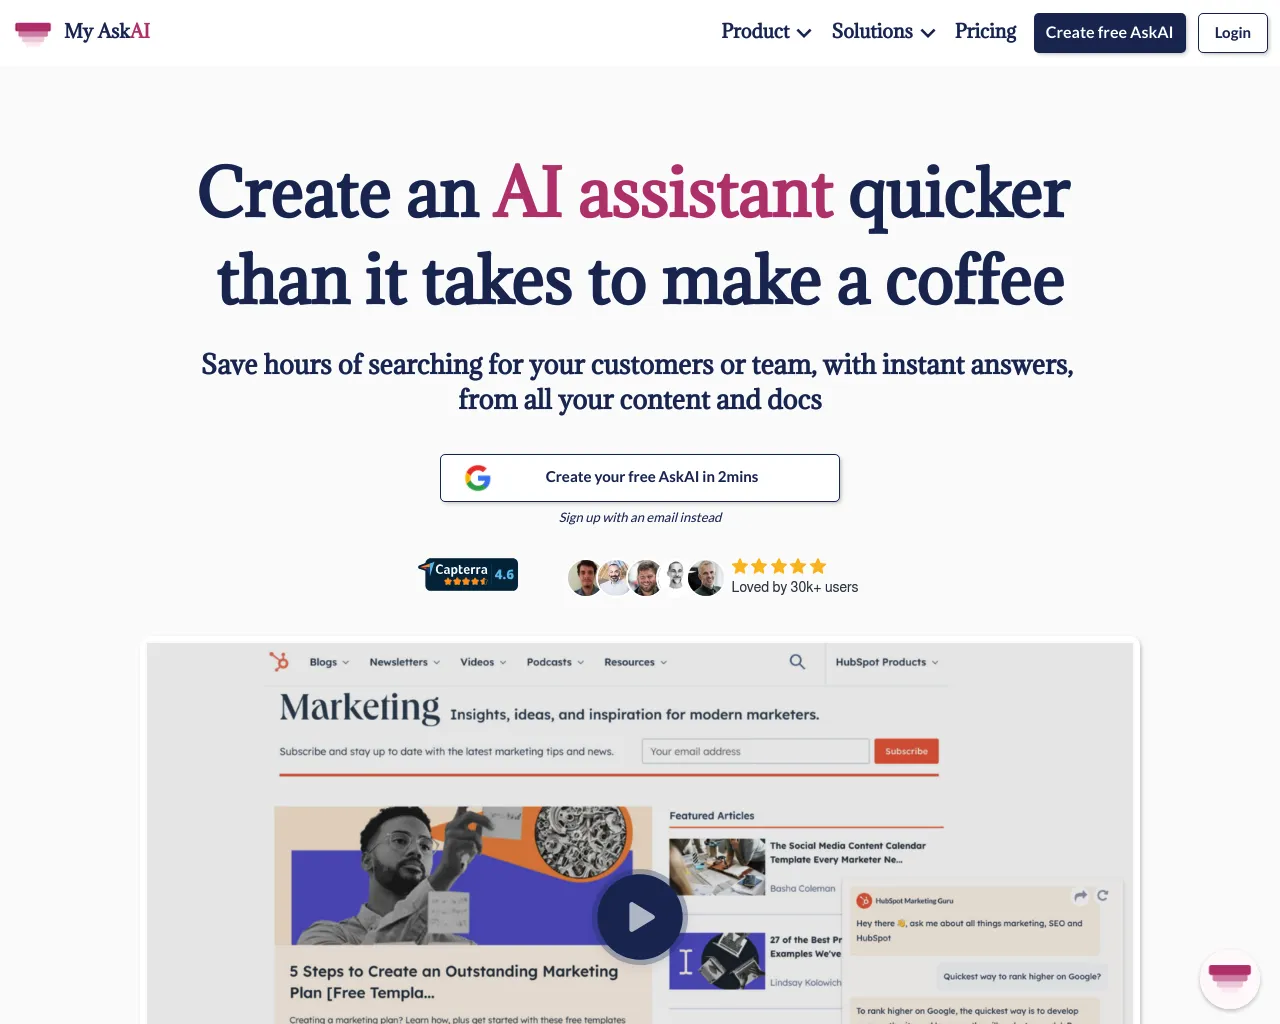 Create an AI assistant quicker than it takes...